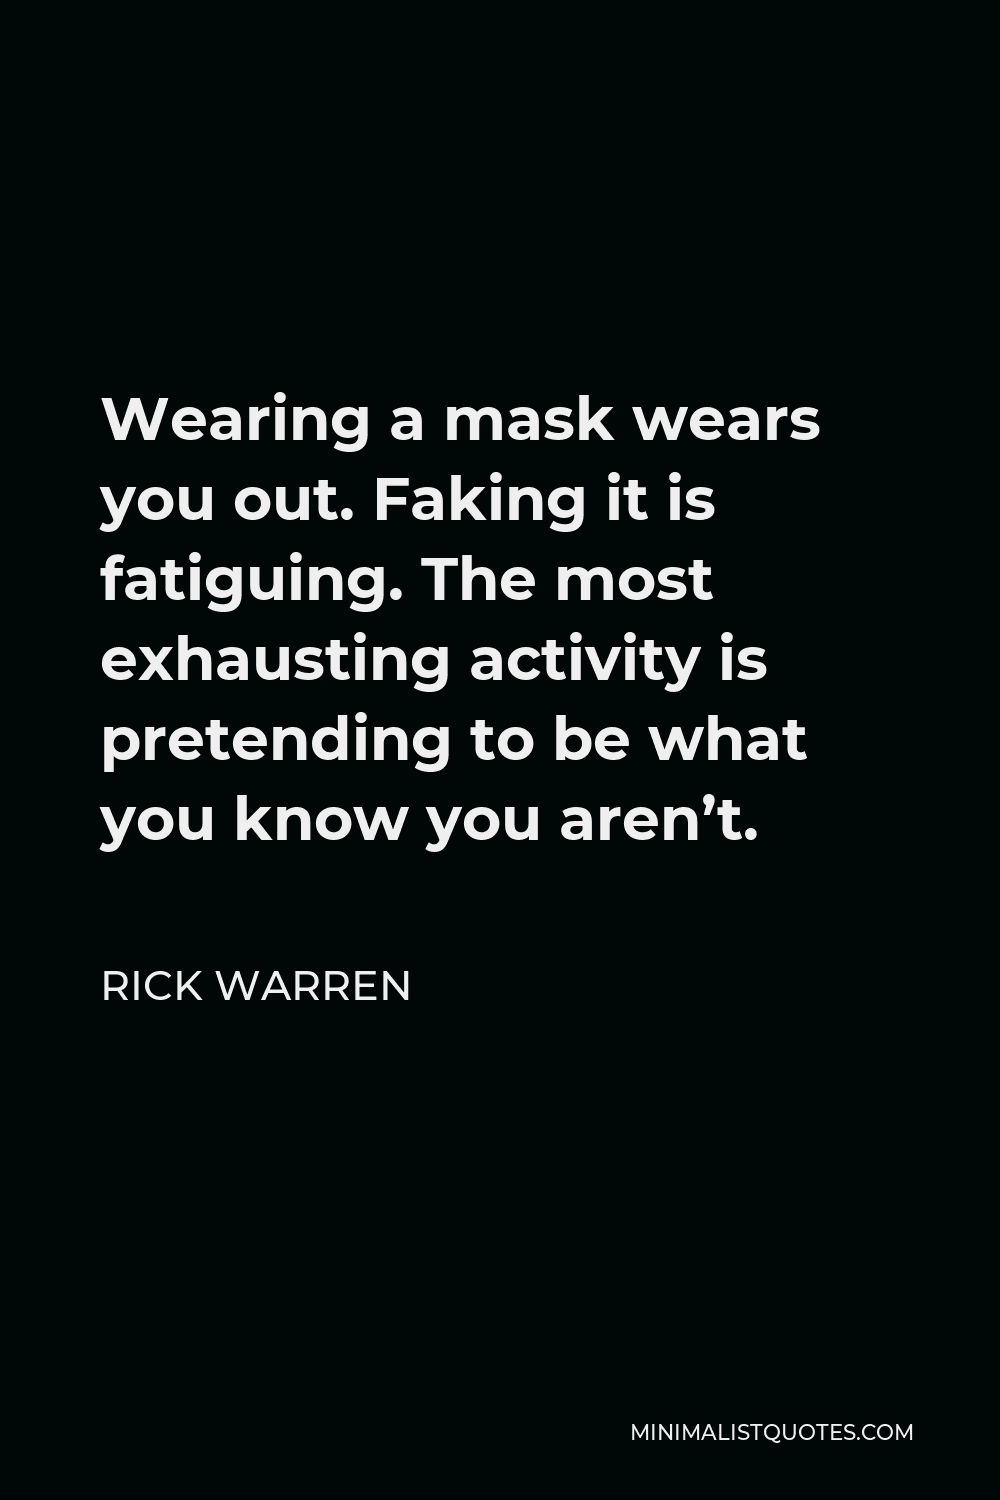 Rick Warren Quote - Wearing a mask wears you out. Faking it is fatiguing. The most exhausting activity is pretending to be what you know you aren’t.